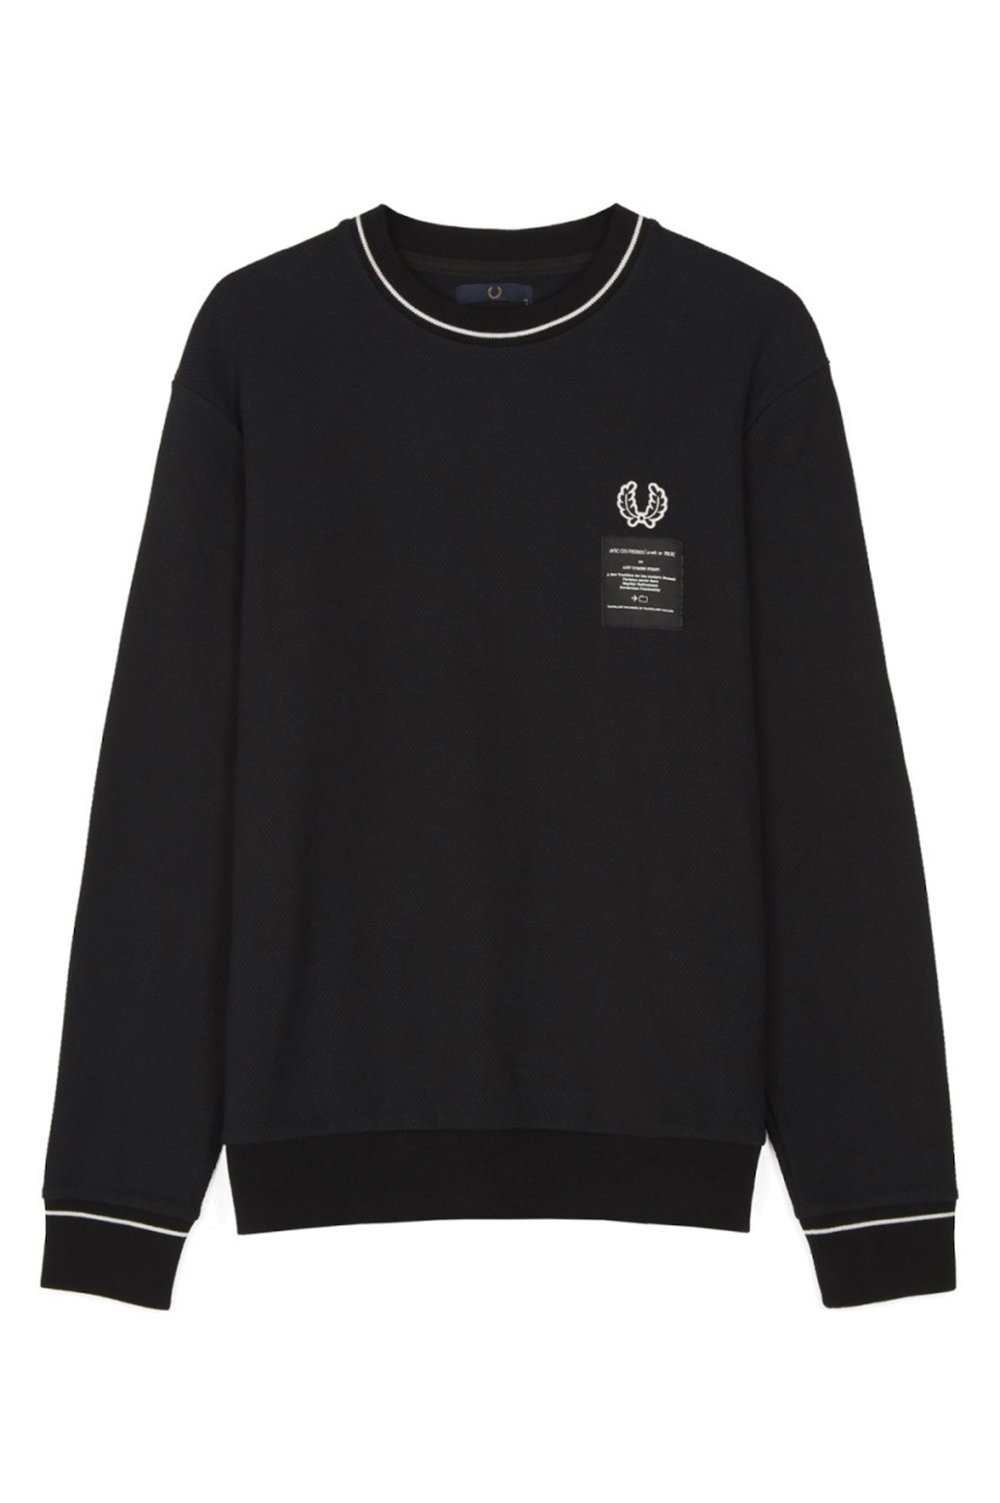 FRED PERRY X ART COMES FIRST PIQUE SWEAT — ART COMES FIRST